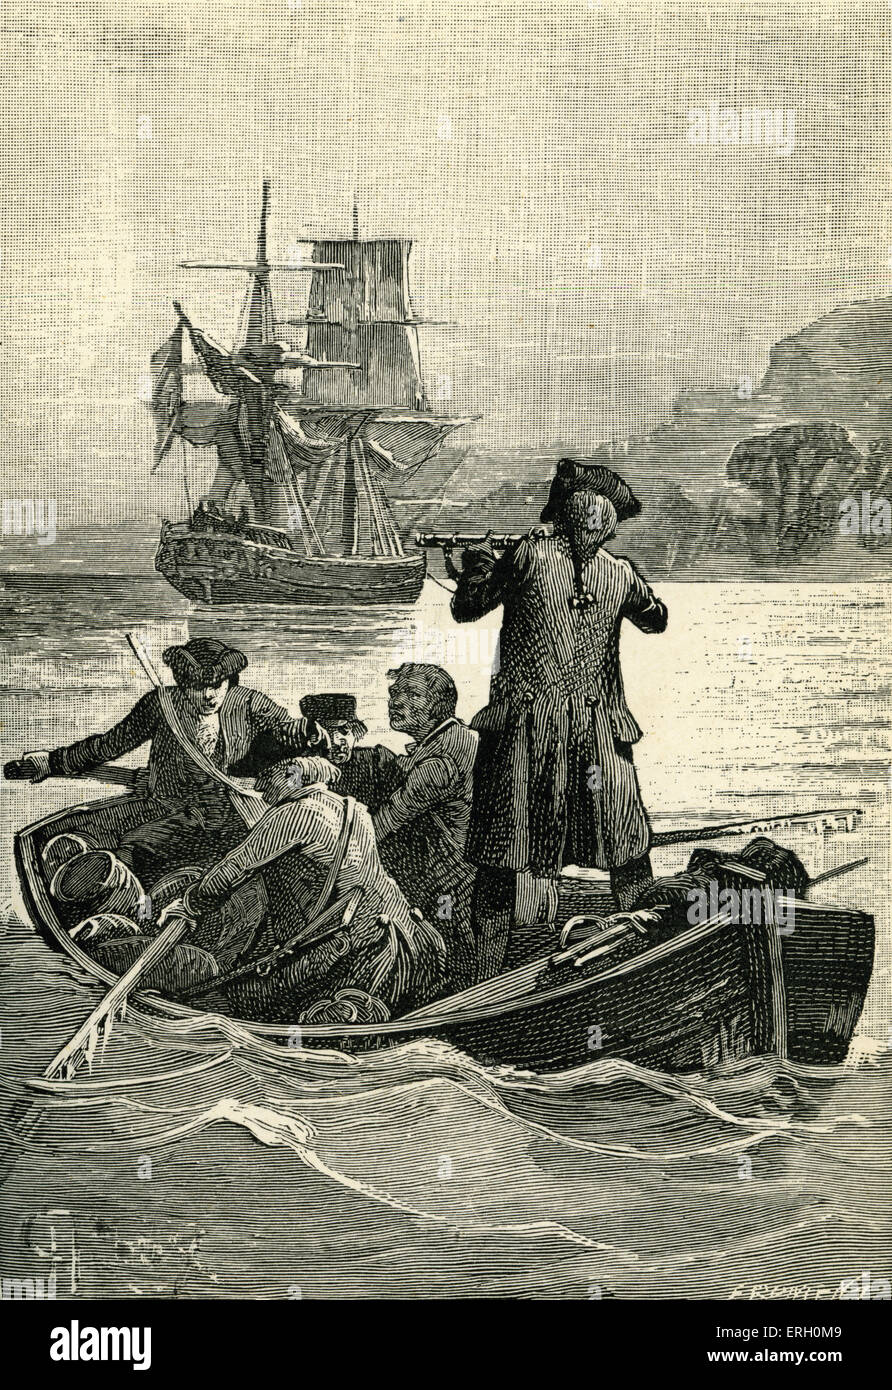 Treasure Island by Robert Louis Stevenson. Caption reads: 'The Squire raised his gun, the rowing ceased.' (Squire John Stock Photo